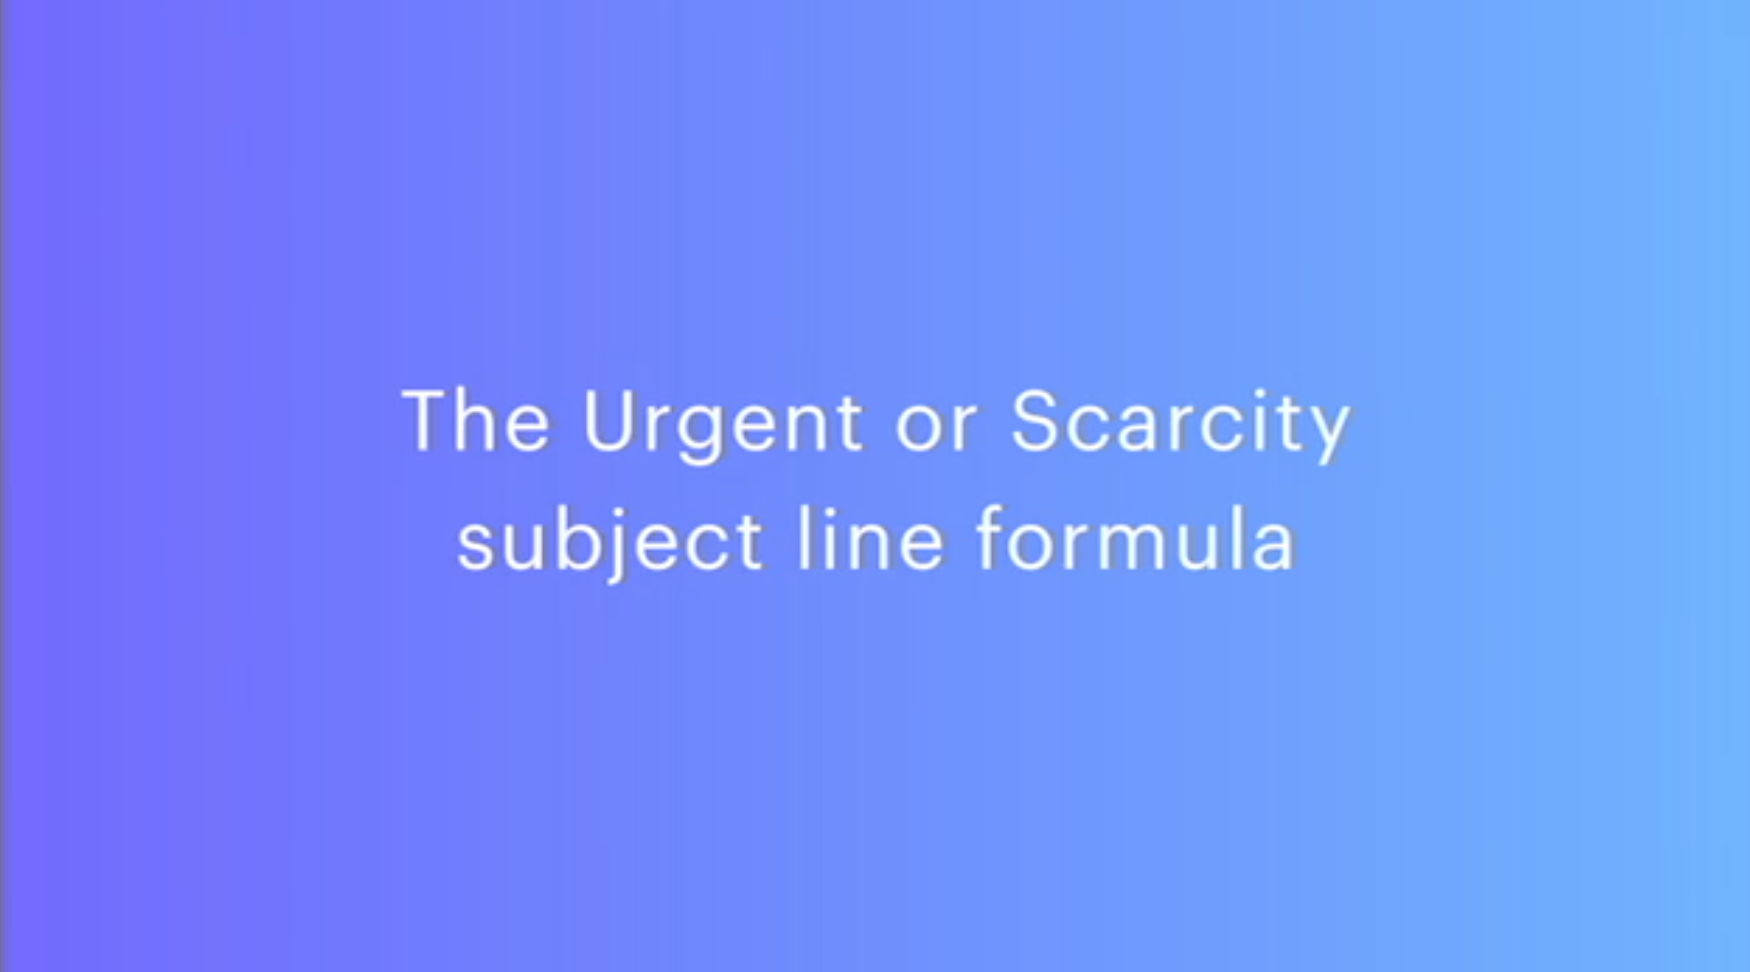 The scarcity subject line formula or the urgent subject line formula